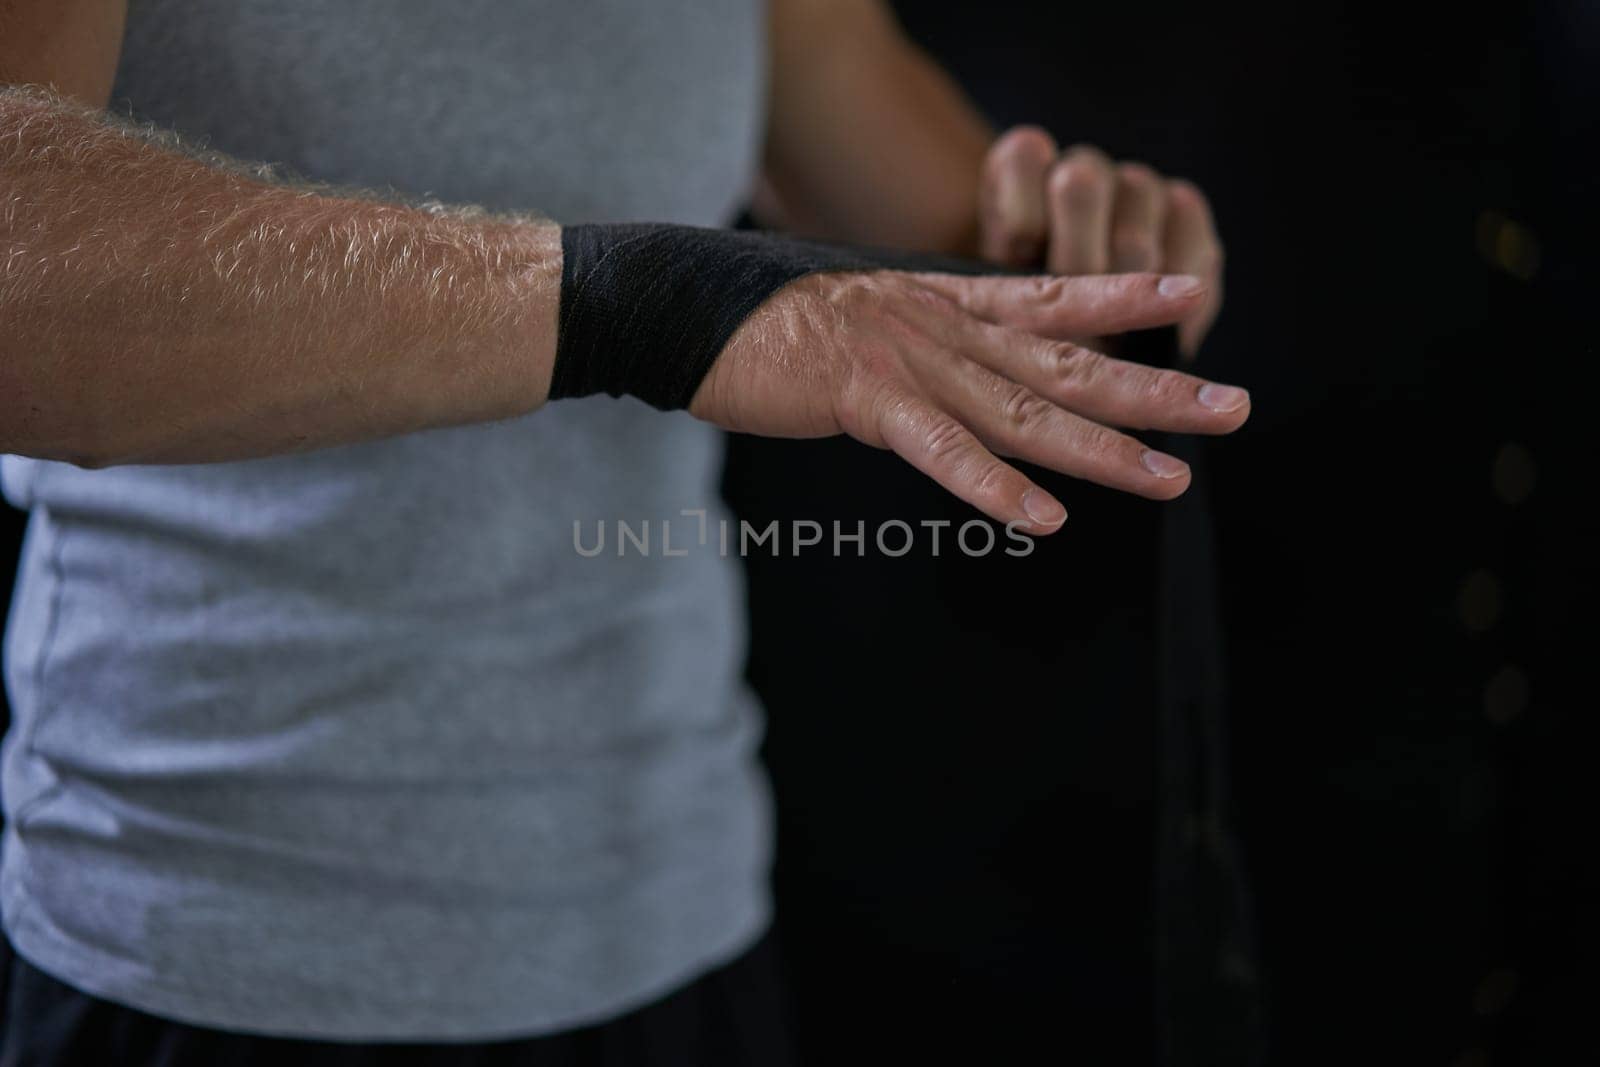 Anonymous kickboxer wrapping bandage on hand in gym by andreonegin